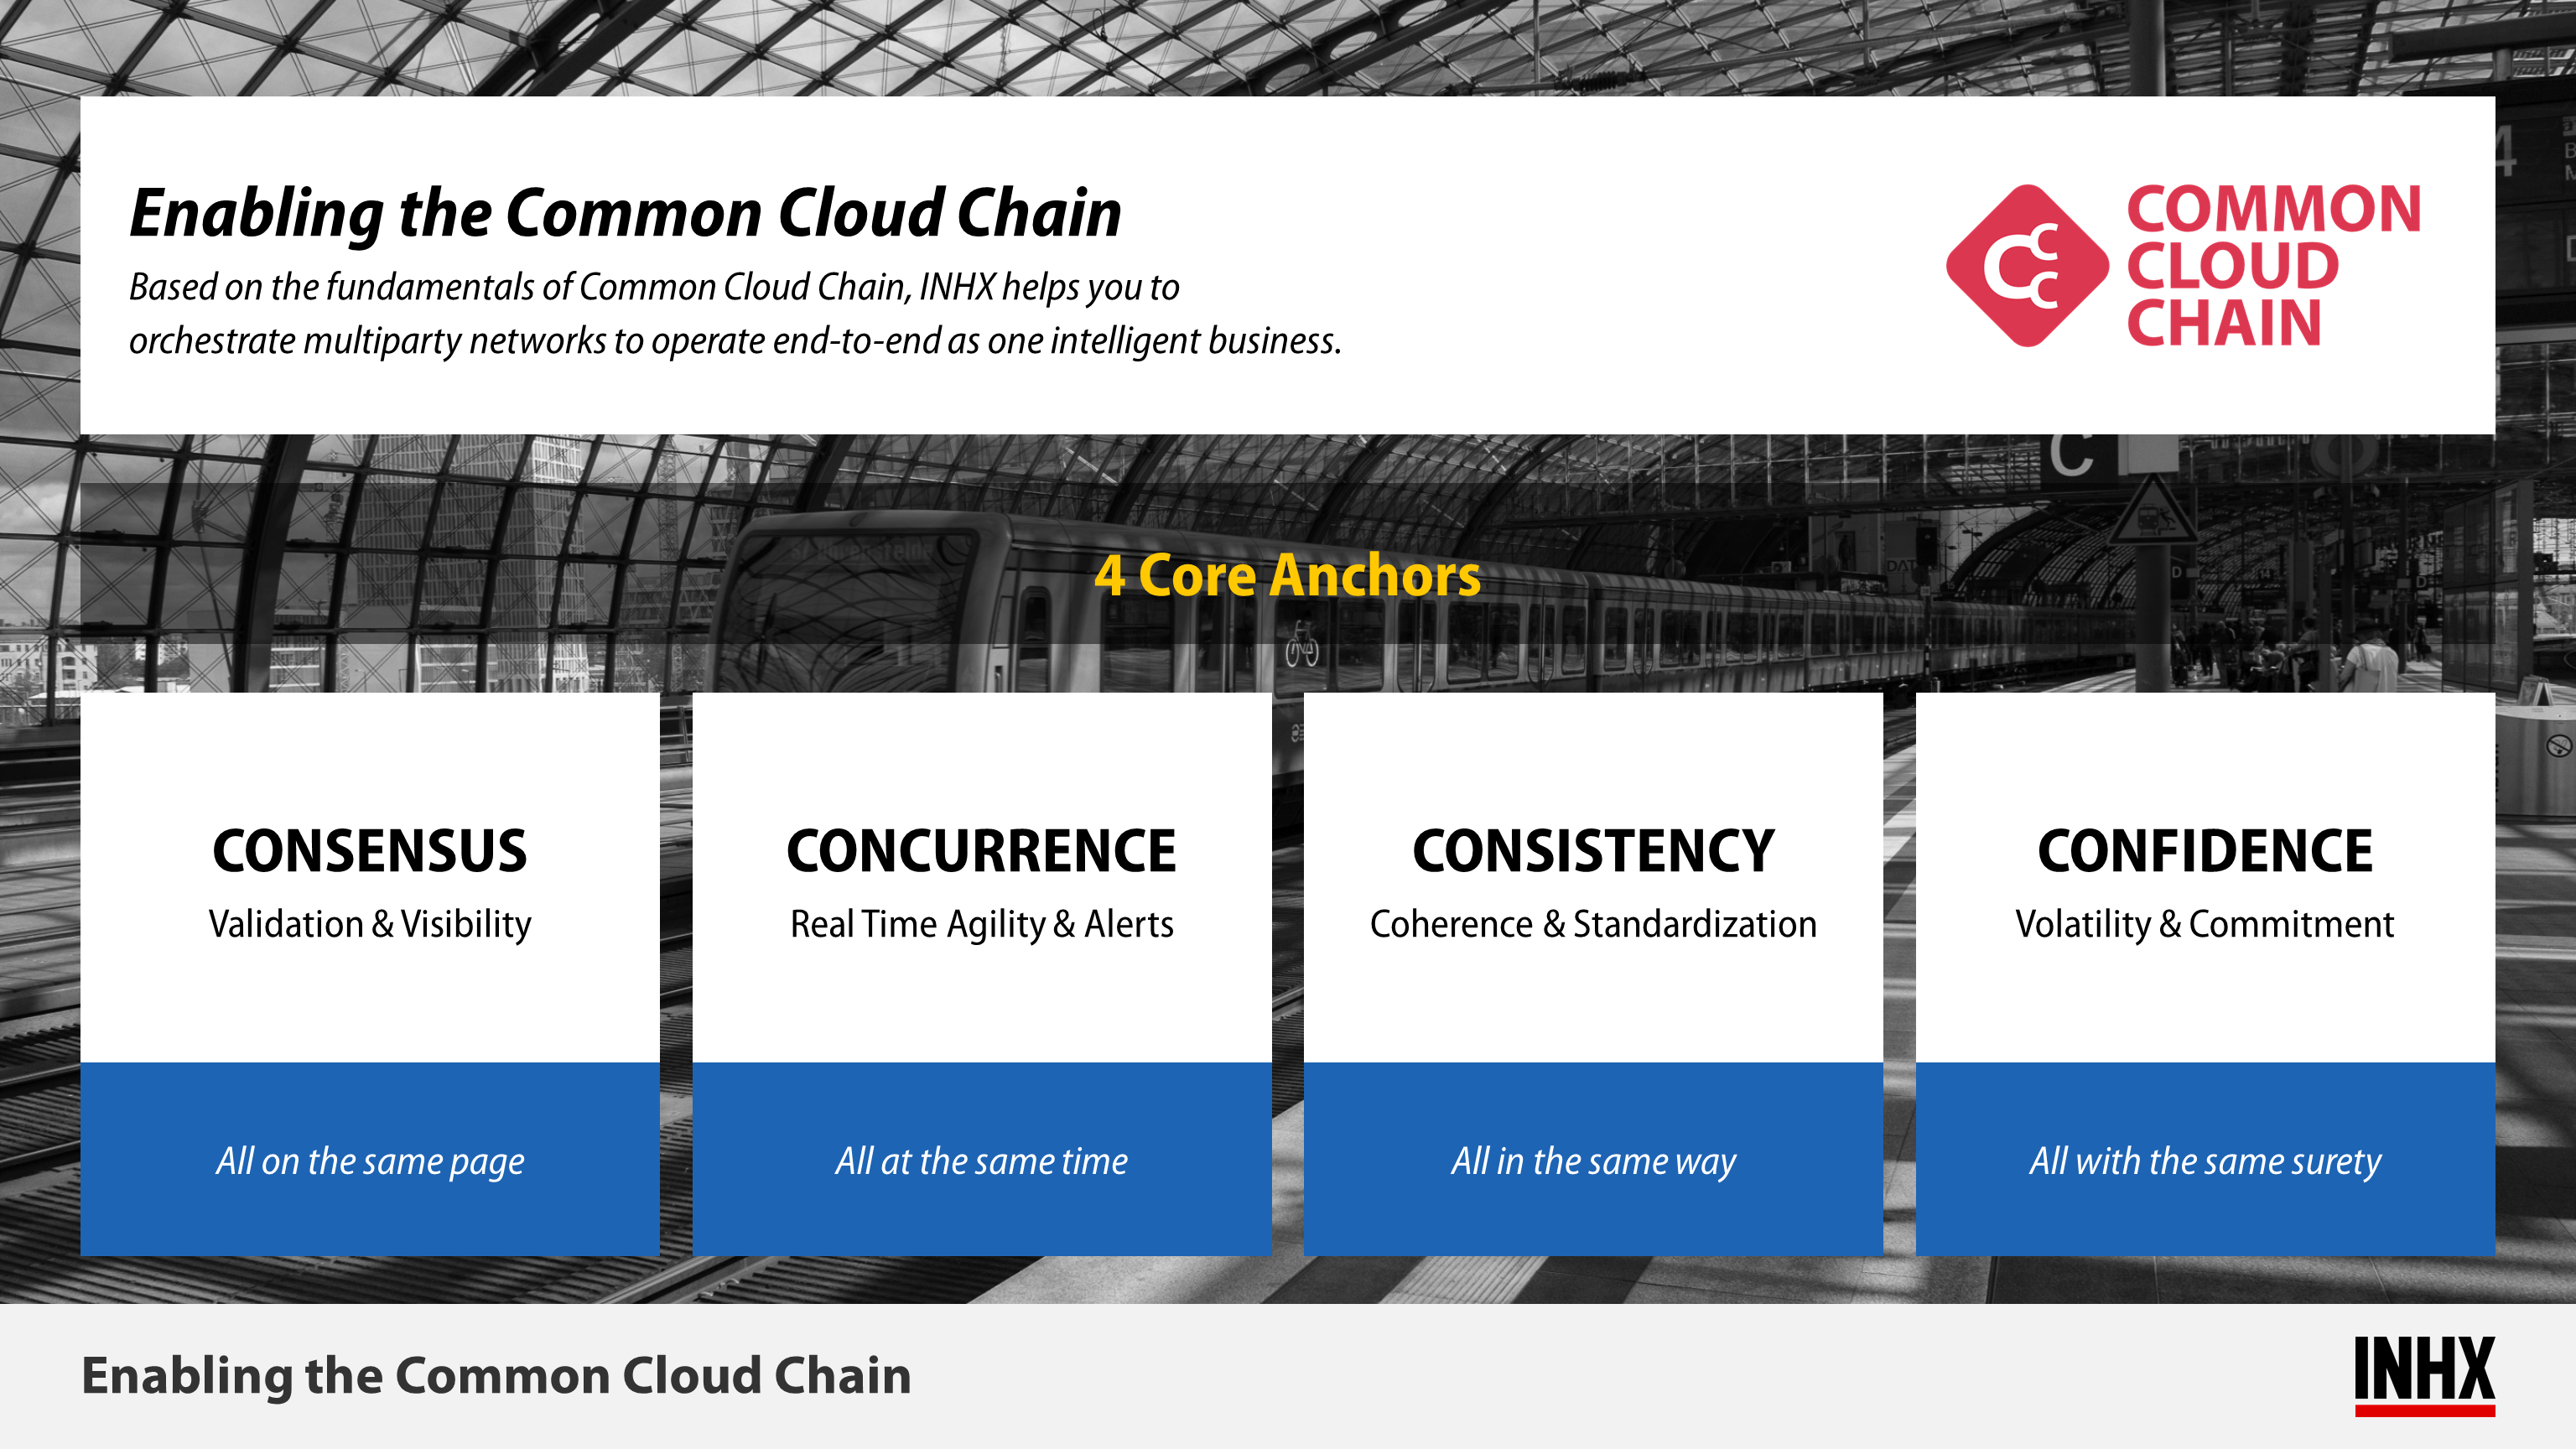 CCC Enabling the Common Cloud Chain